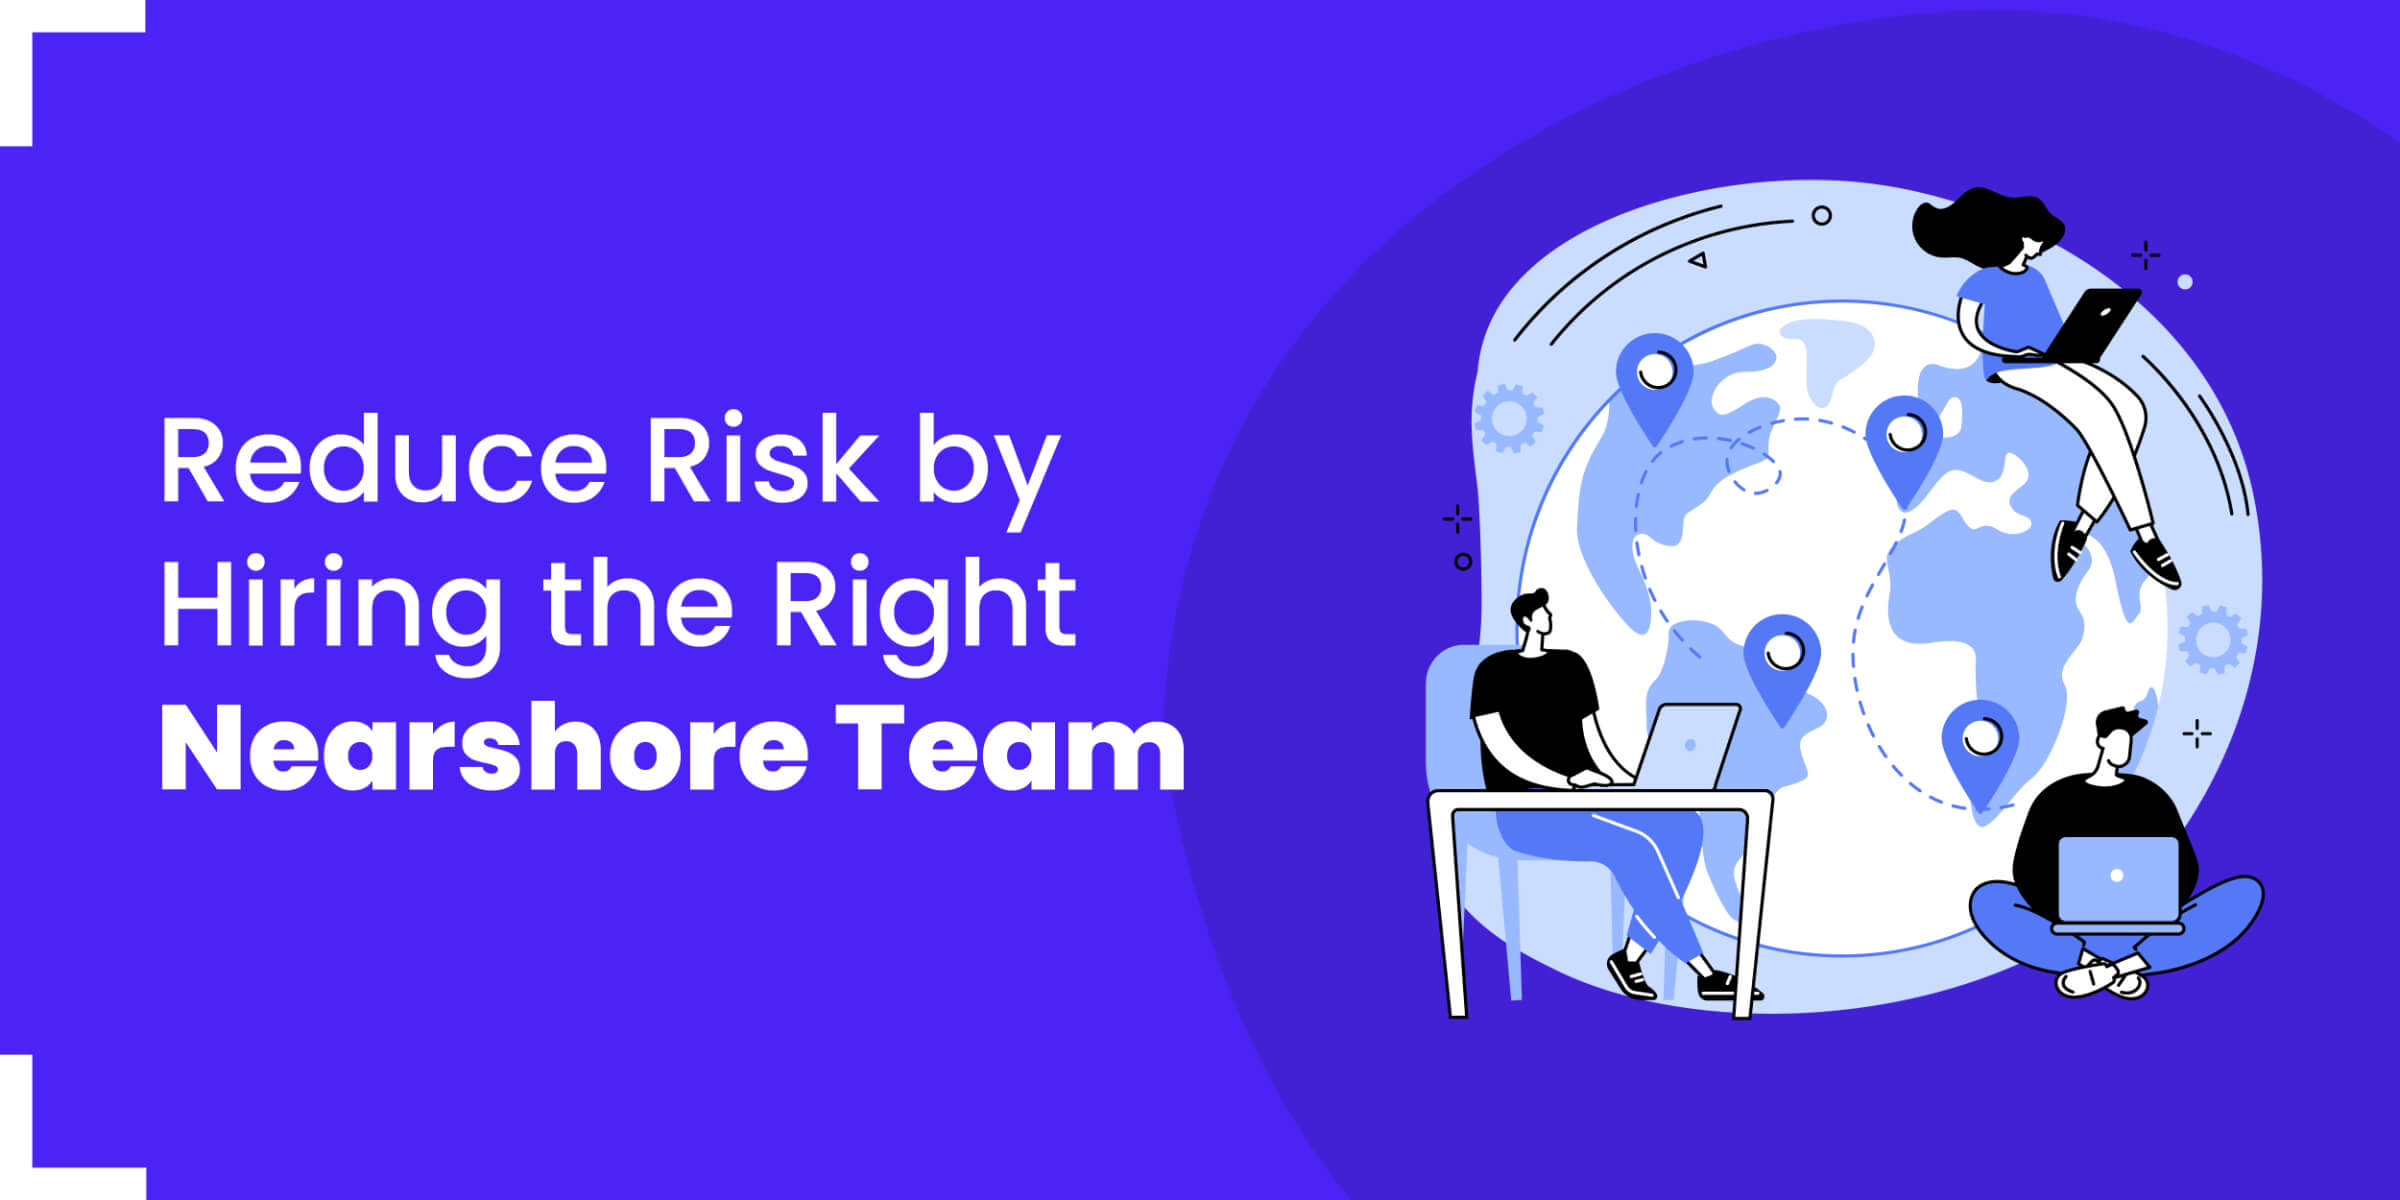 Reduce Risk by Hiring the Right Nearshore Team